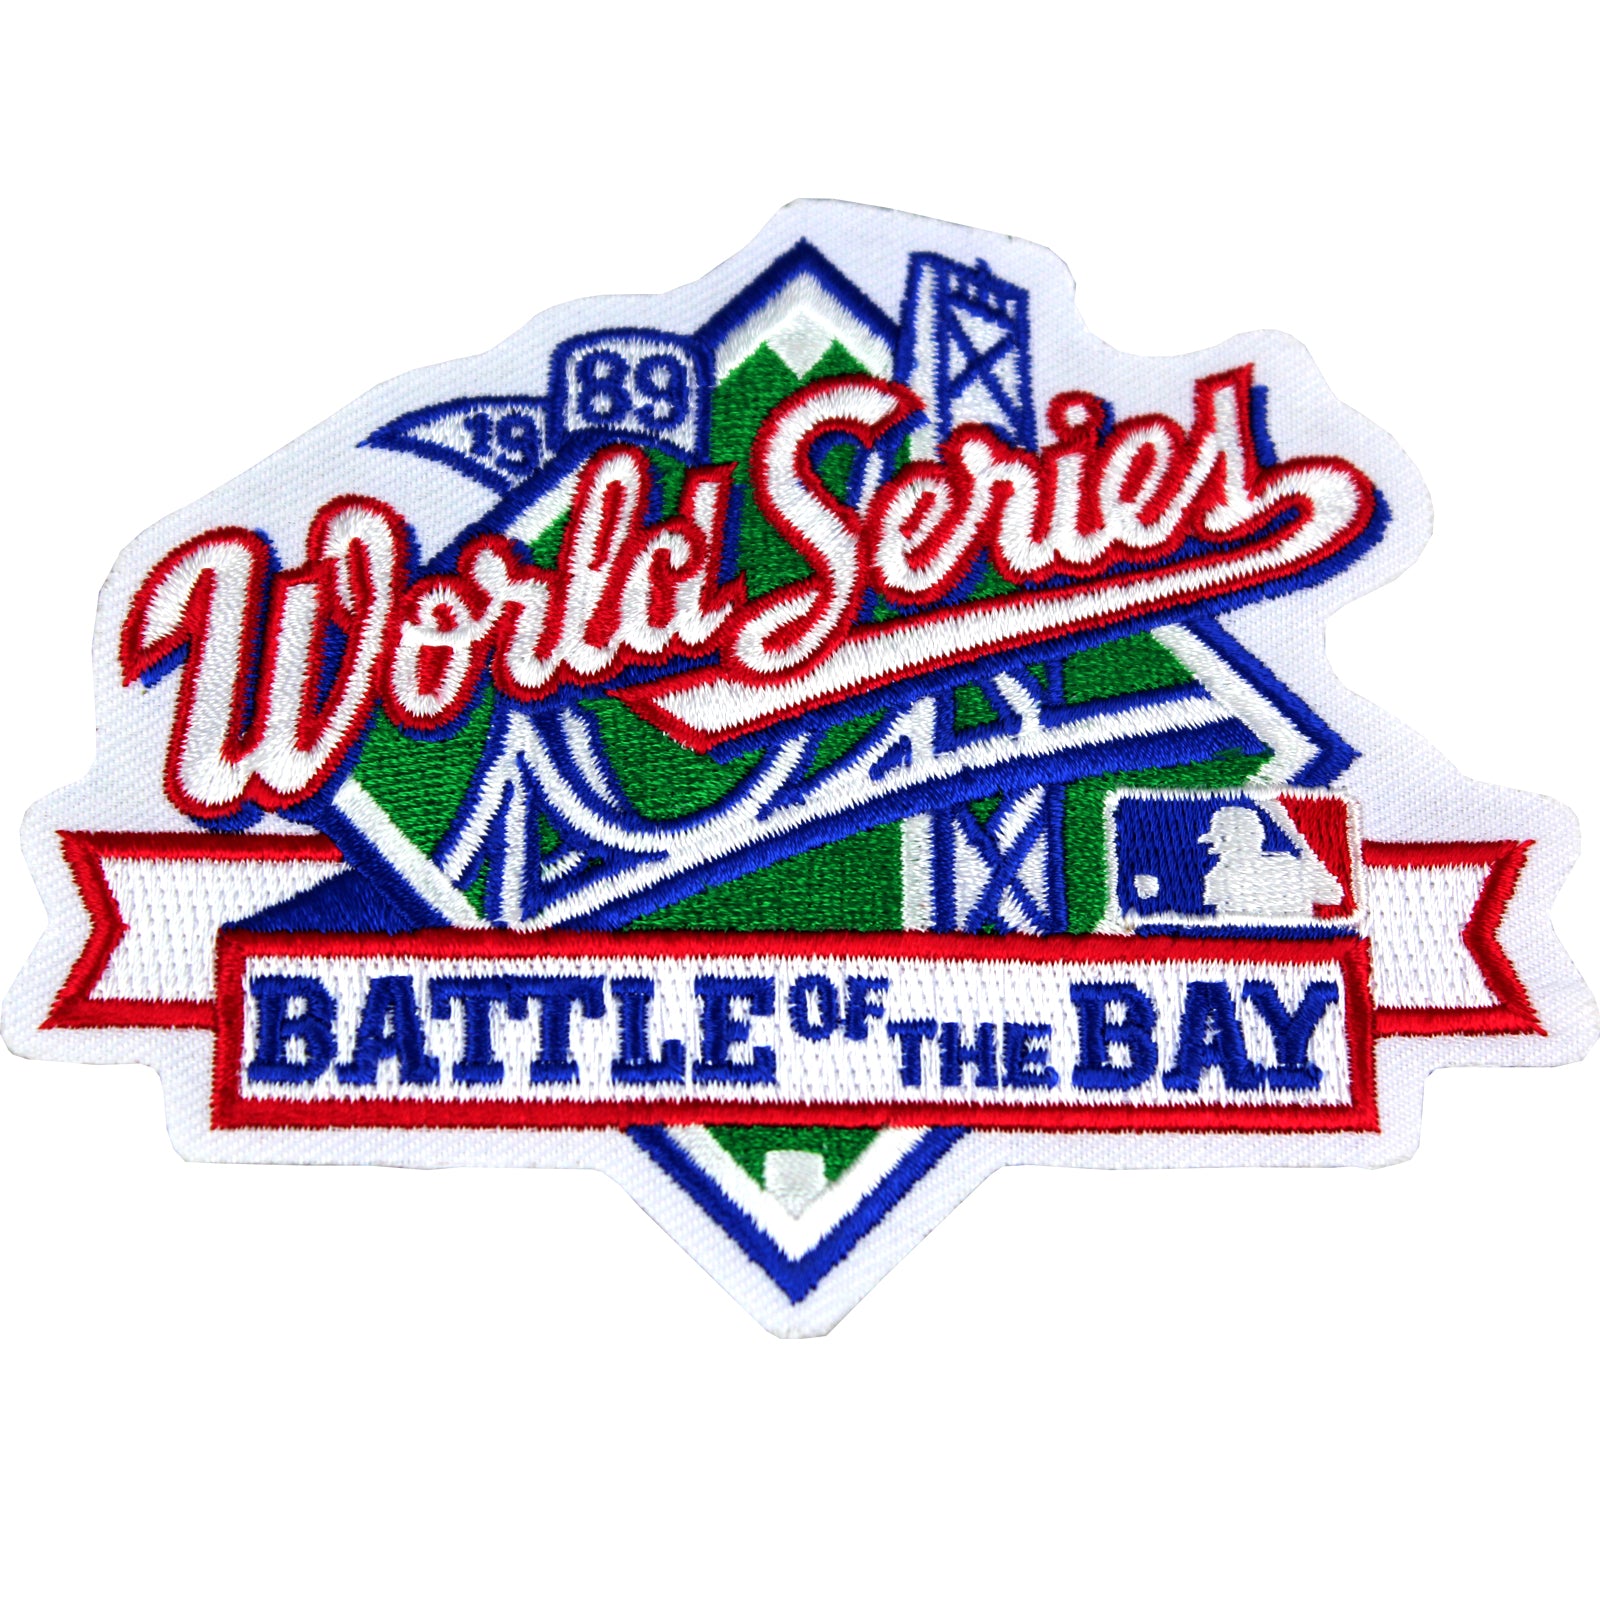 Mitchell & Ness on X: The Battle of The Bay- the 1989 World Series  featured two Bay Area team's in the @Athletics & @SFGiants. To  commemorate the 30th anniversary of this series